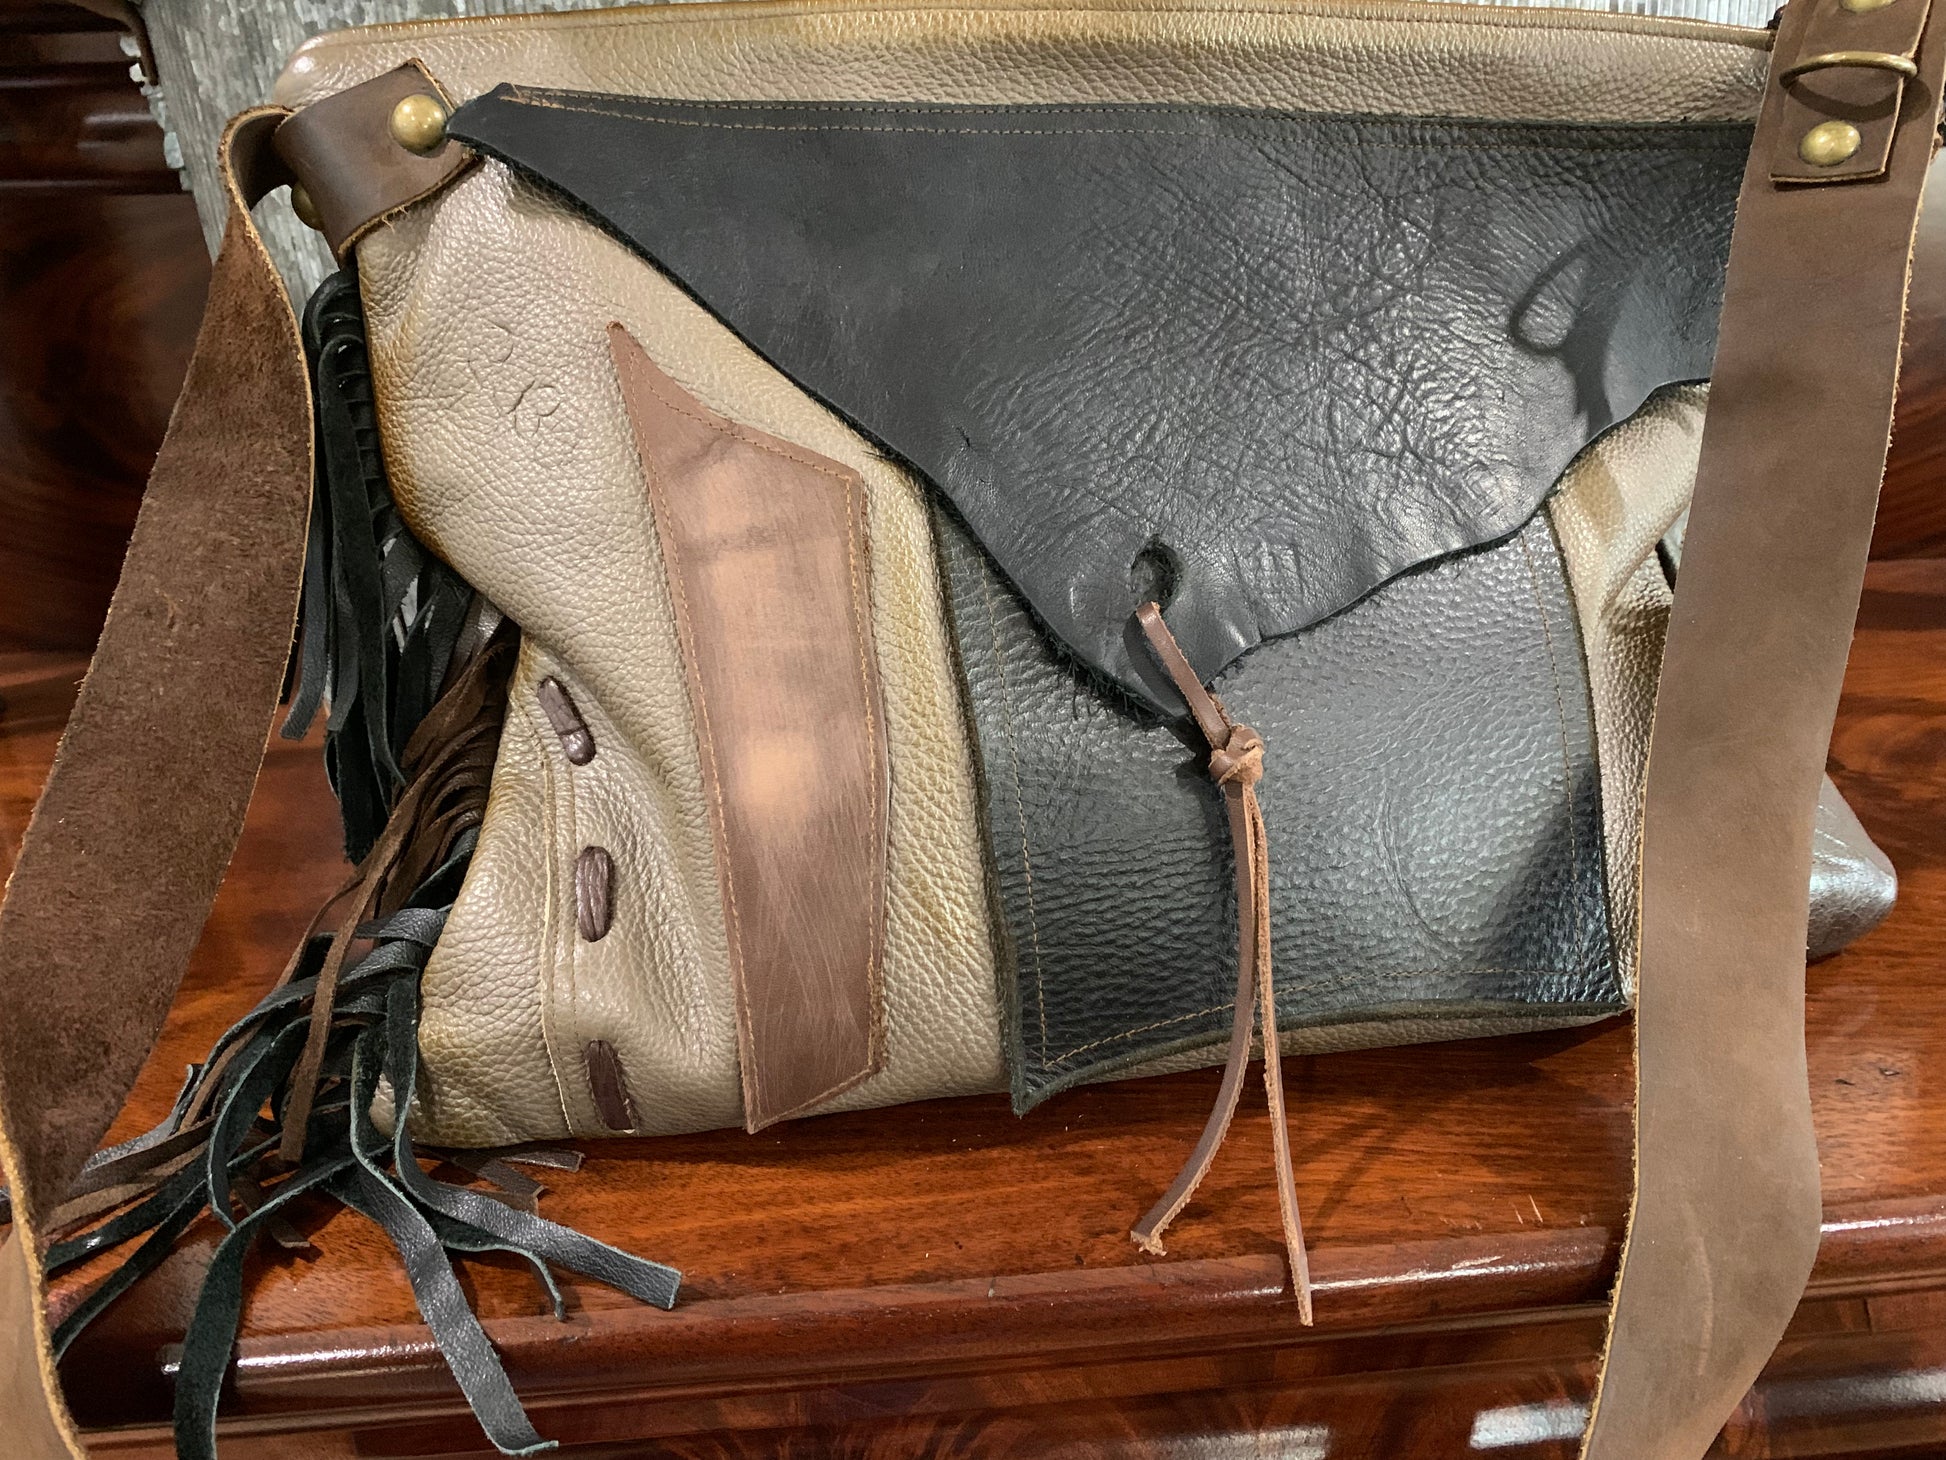 RE-DMD All leather Bag! - DMD Bags